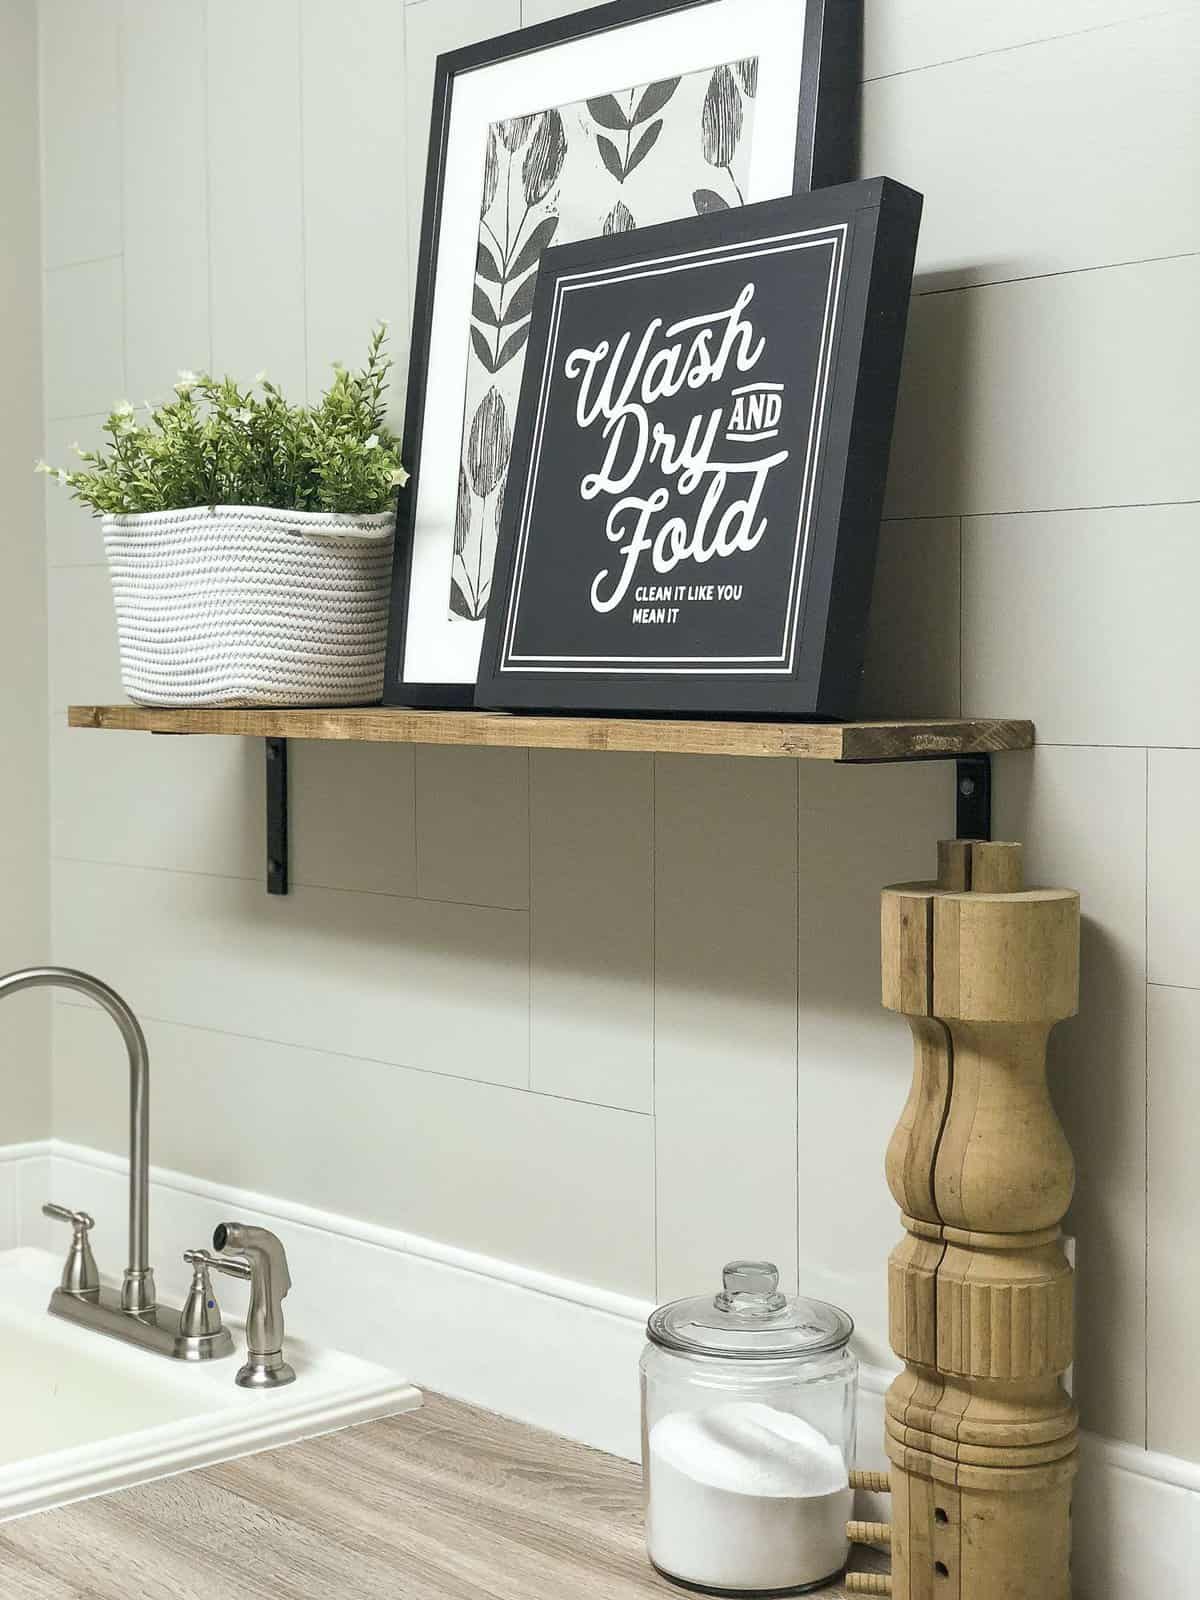 Is your laundry room in need of a facelift? See how I take my laundry room decor and more from dark and dated to beautiful form and function, all for $100!